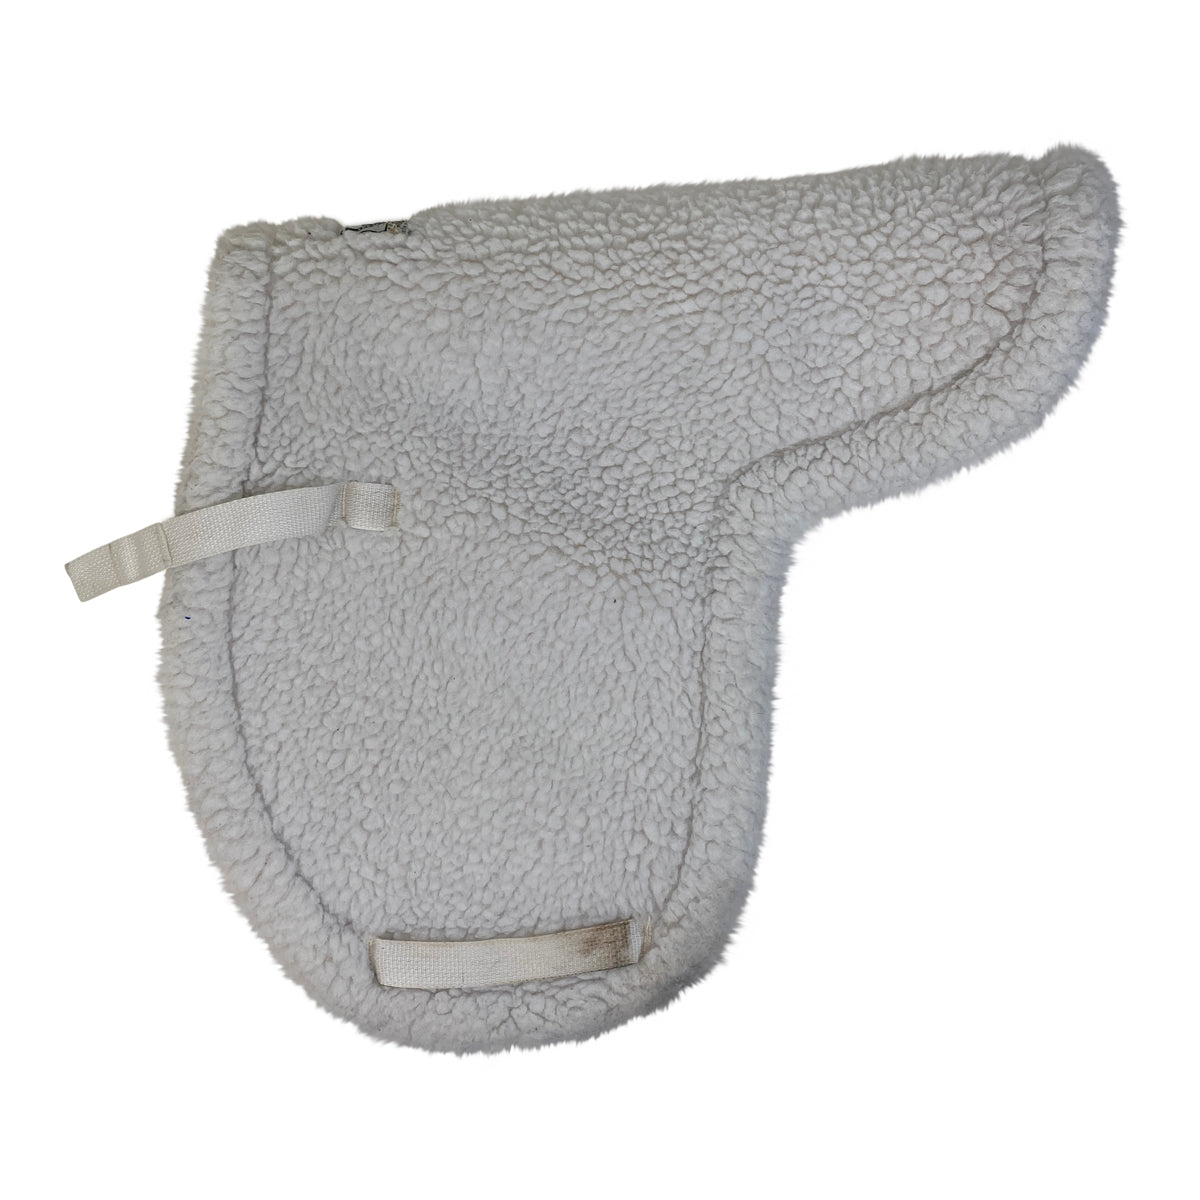 Wilkers Quilted Fleece Shaped Saddle Pad in White